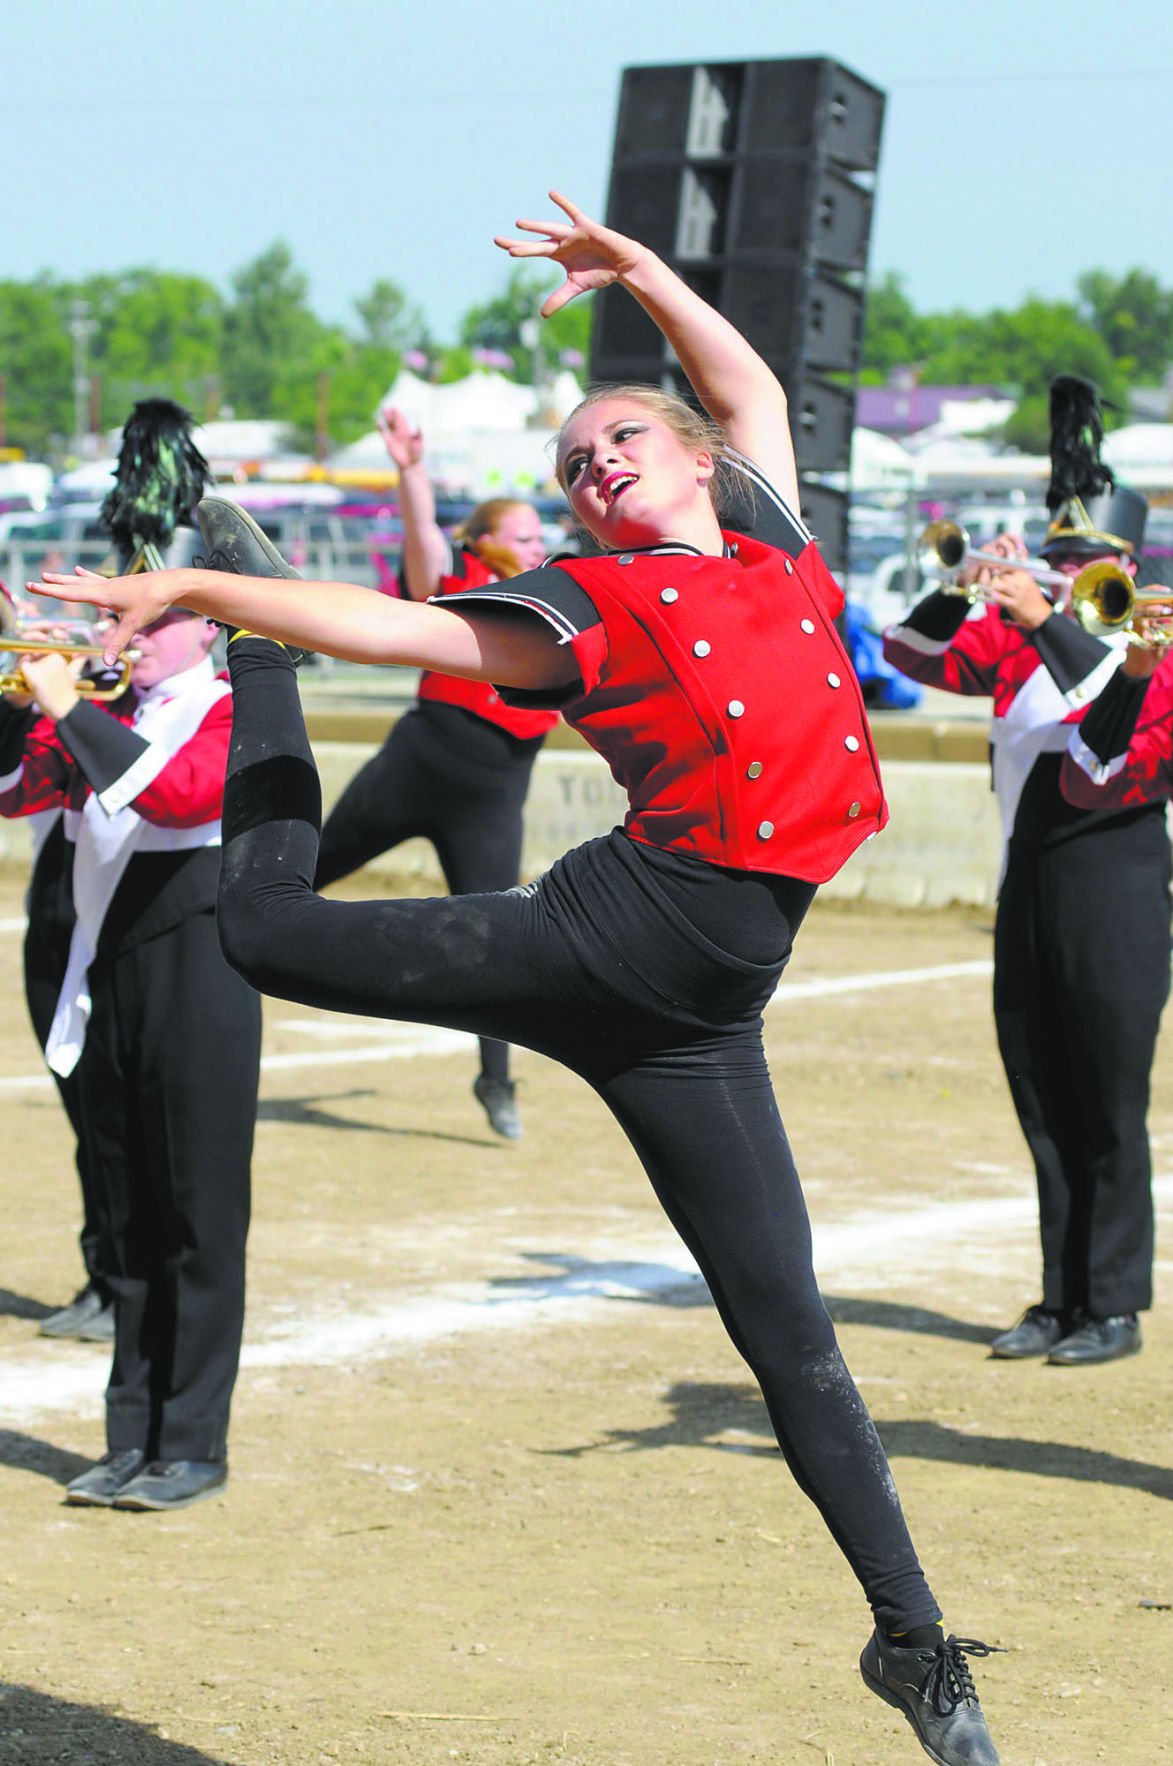 Frankton places 19th overall in band competition | Local News | 0